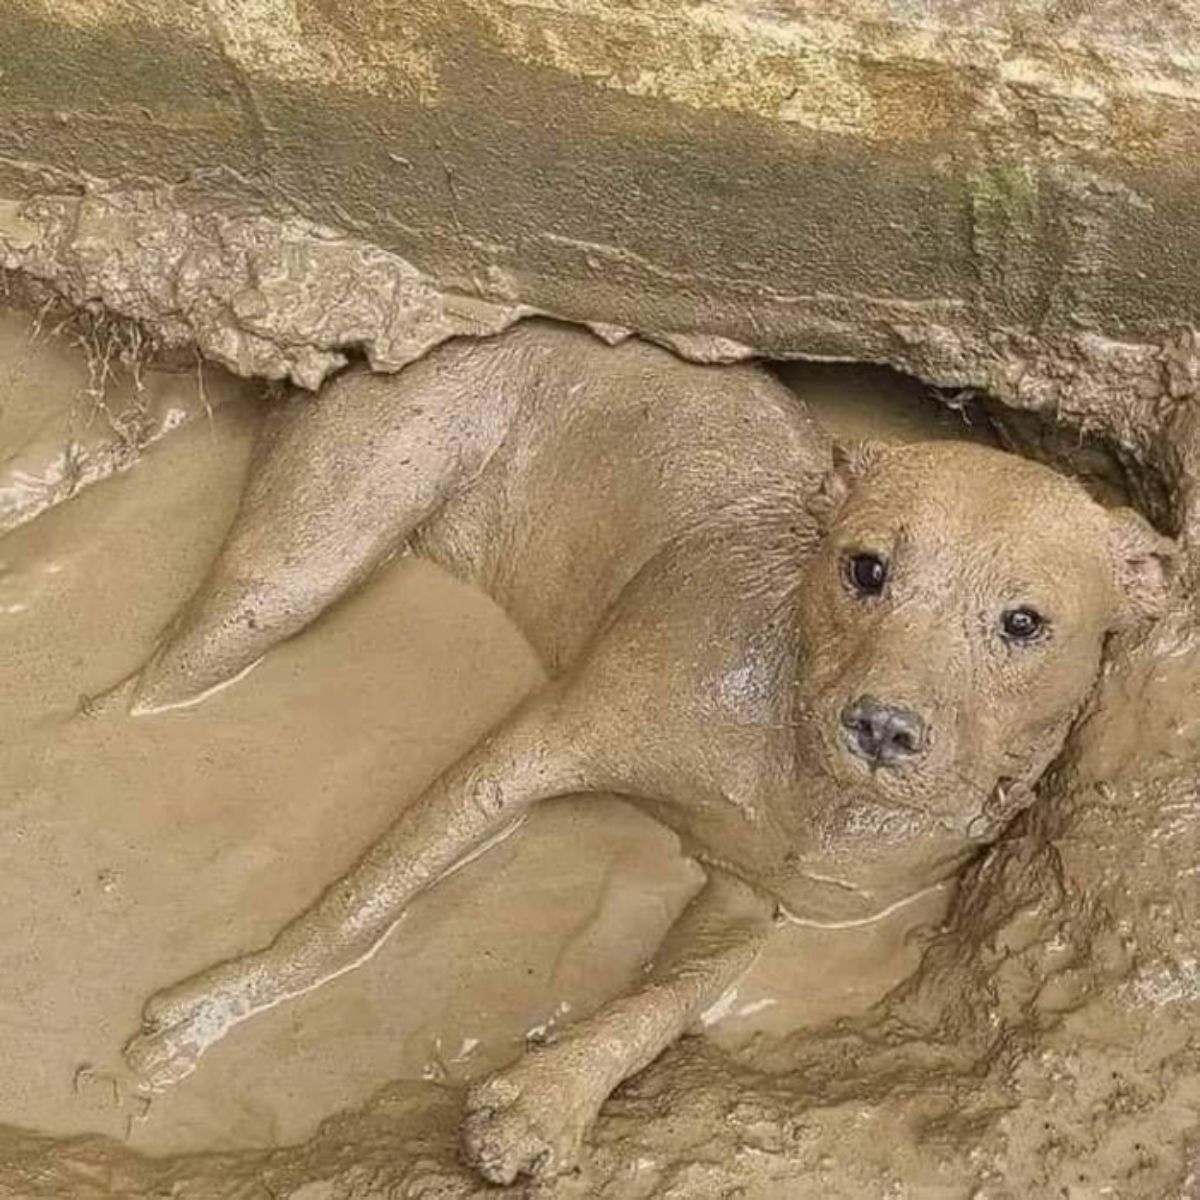 dog covered in mud laying in a mud puddle